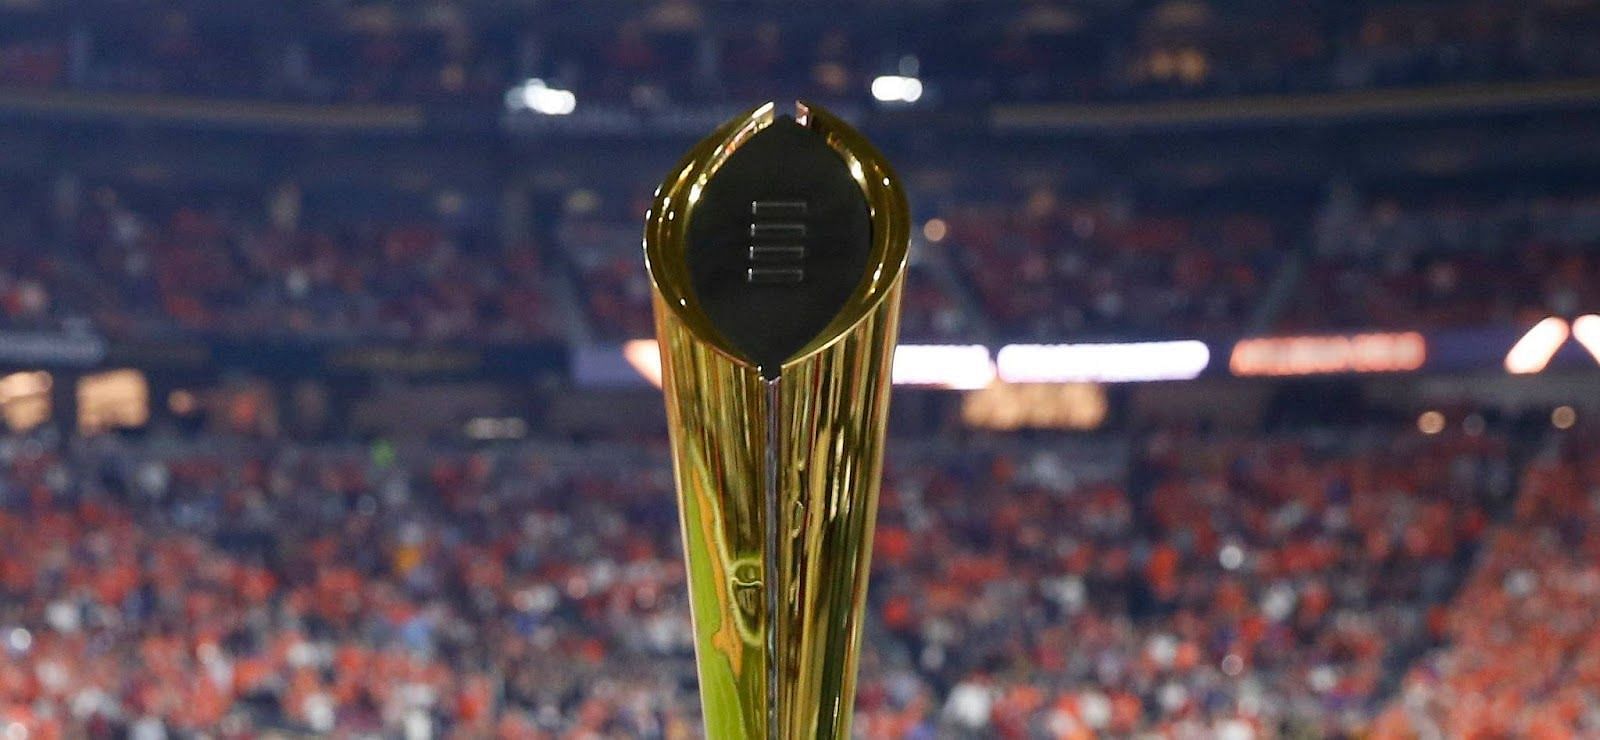 2021 College Football National Championship